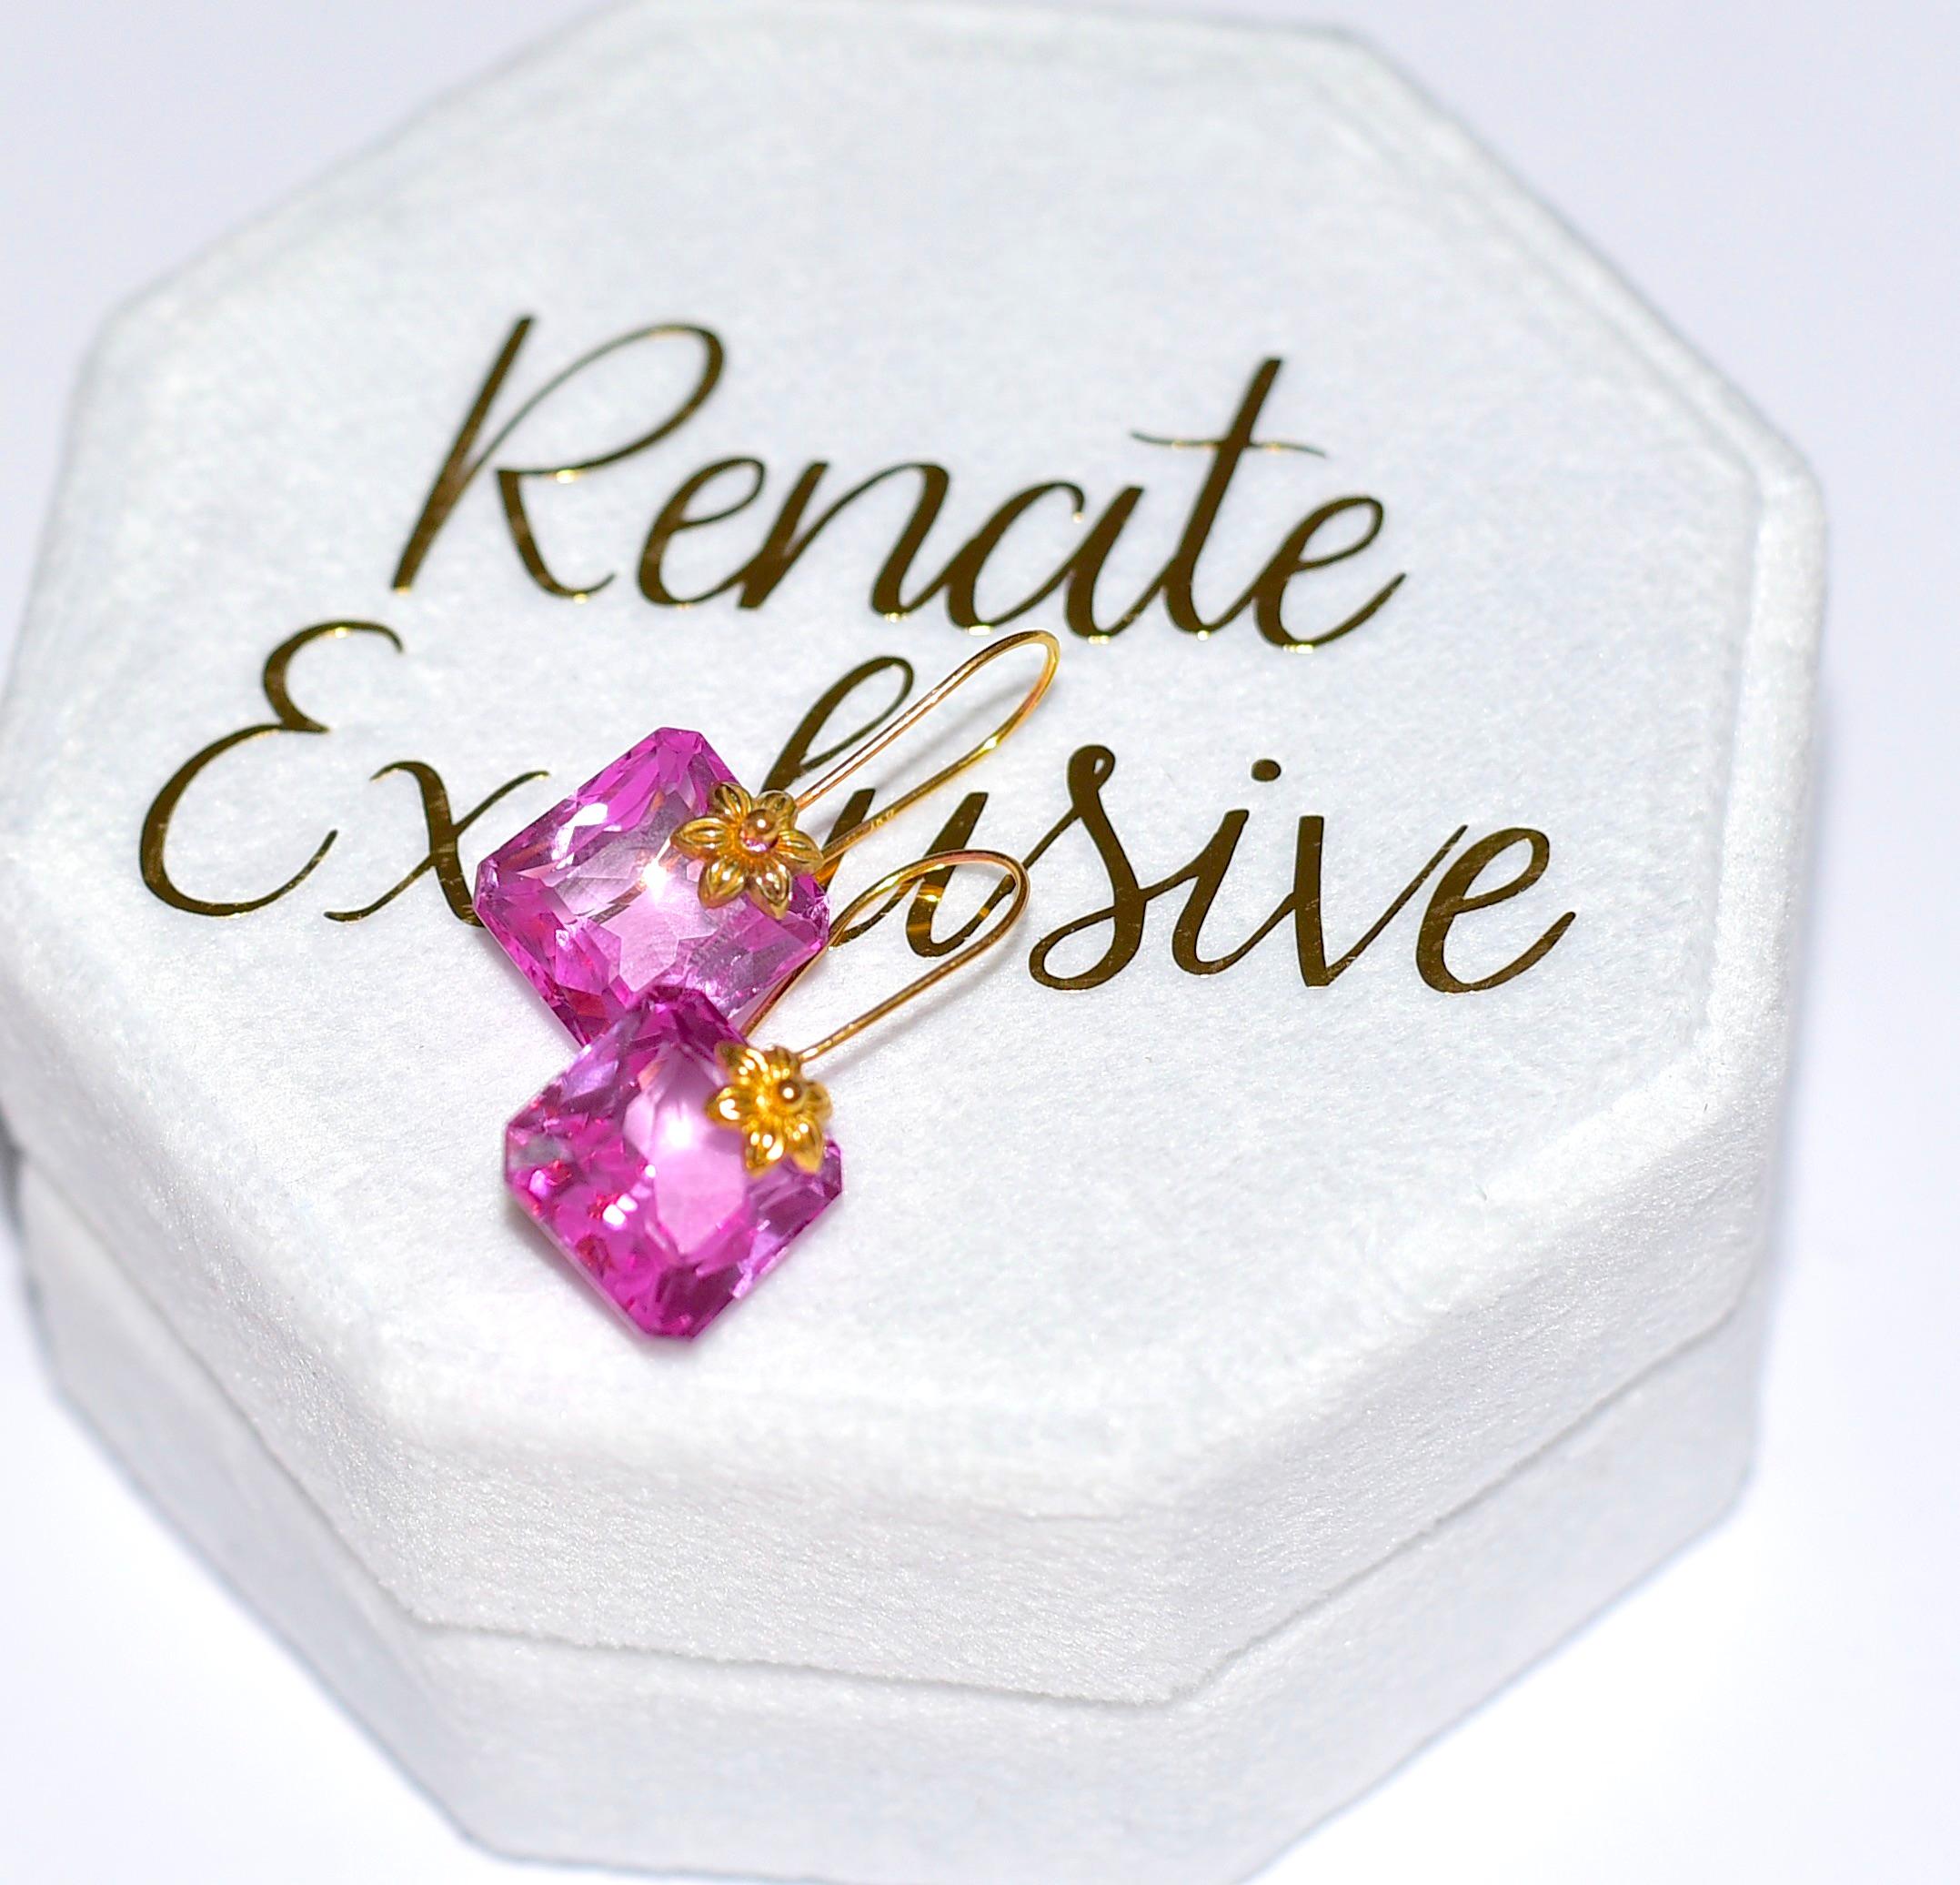 A gorgeous pair of lab-created pink sapphire (13,3mm x 12,5mm) with an 18K Solid Yellow Gold accent. Timeless jewelry design that takes your breath away! Rich pink bubble gum color with sparkling shine!
A bonus is an affordable price!
